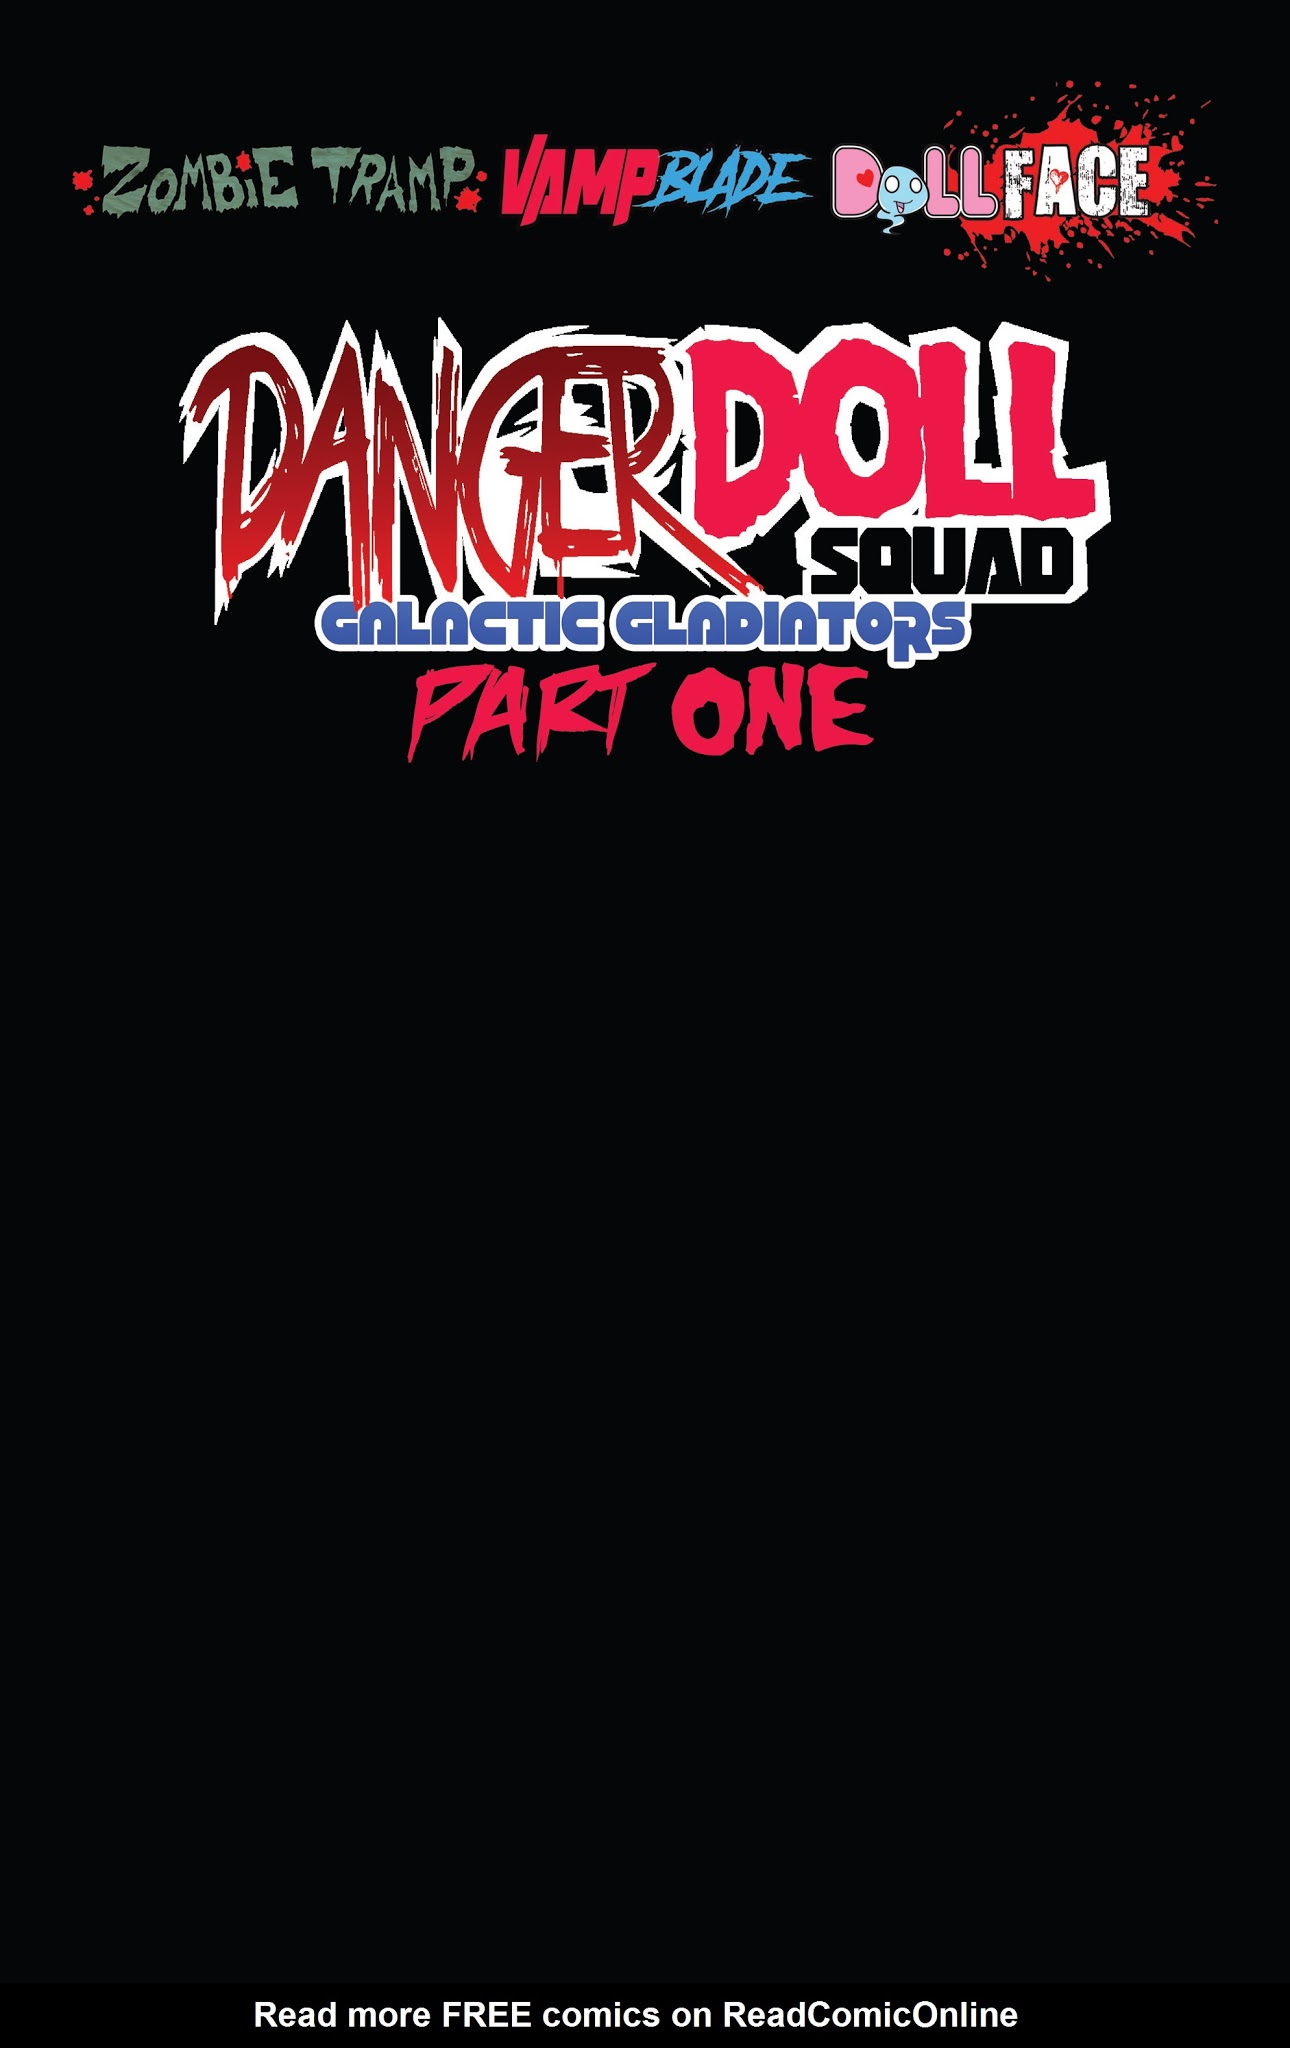 Read online Danger Doll Squad: Galactic Gladiators comic -  Issue #1 - 2